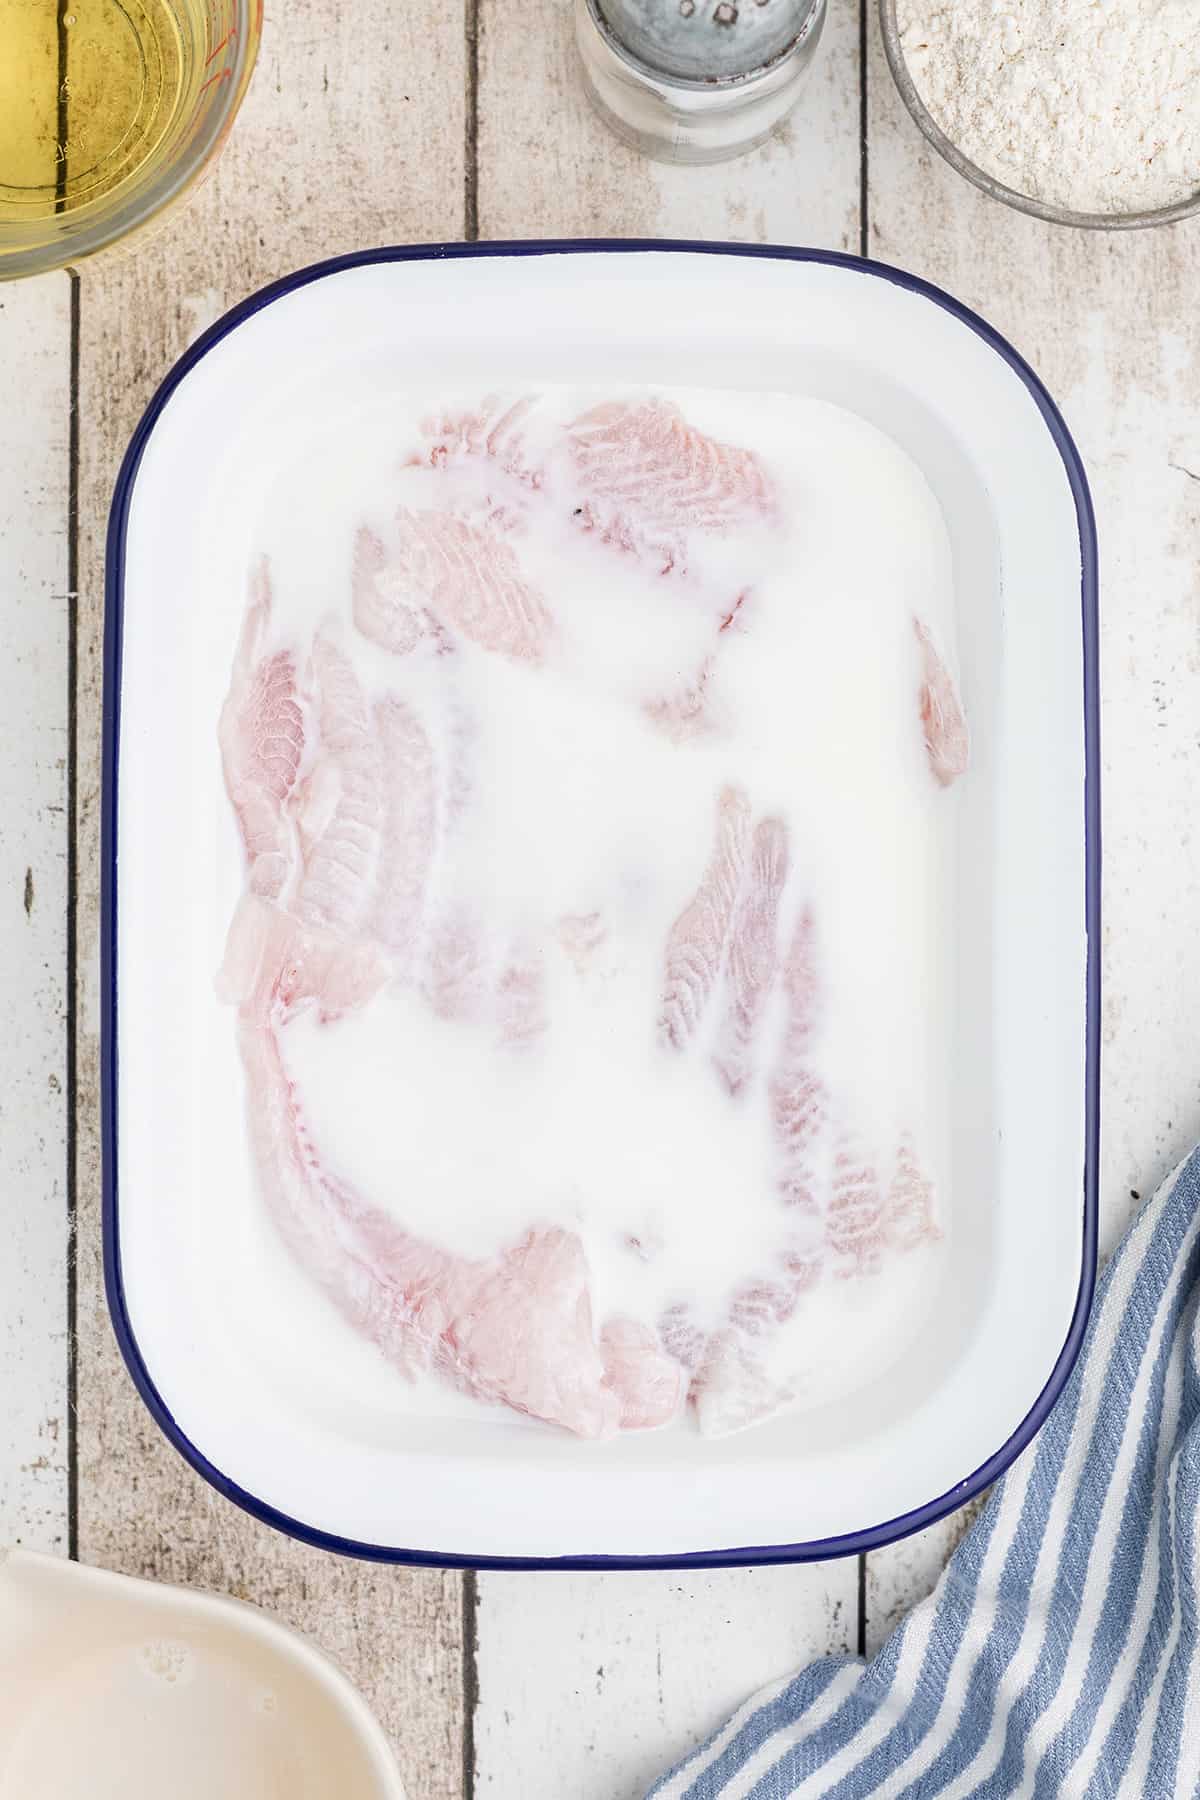 Catfish fillets covered with milk in a pan.